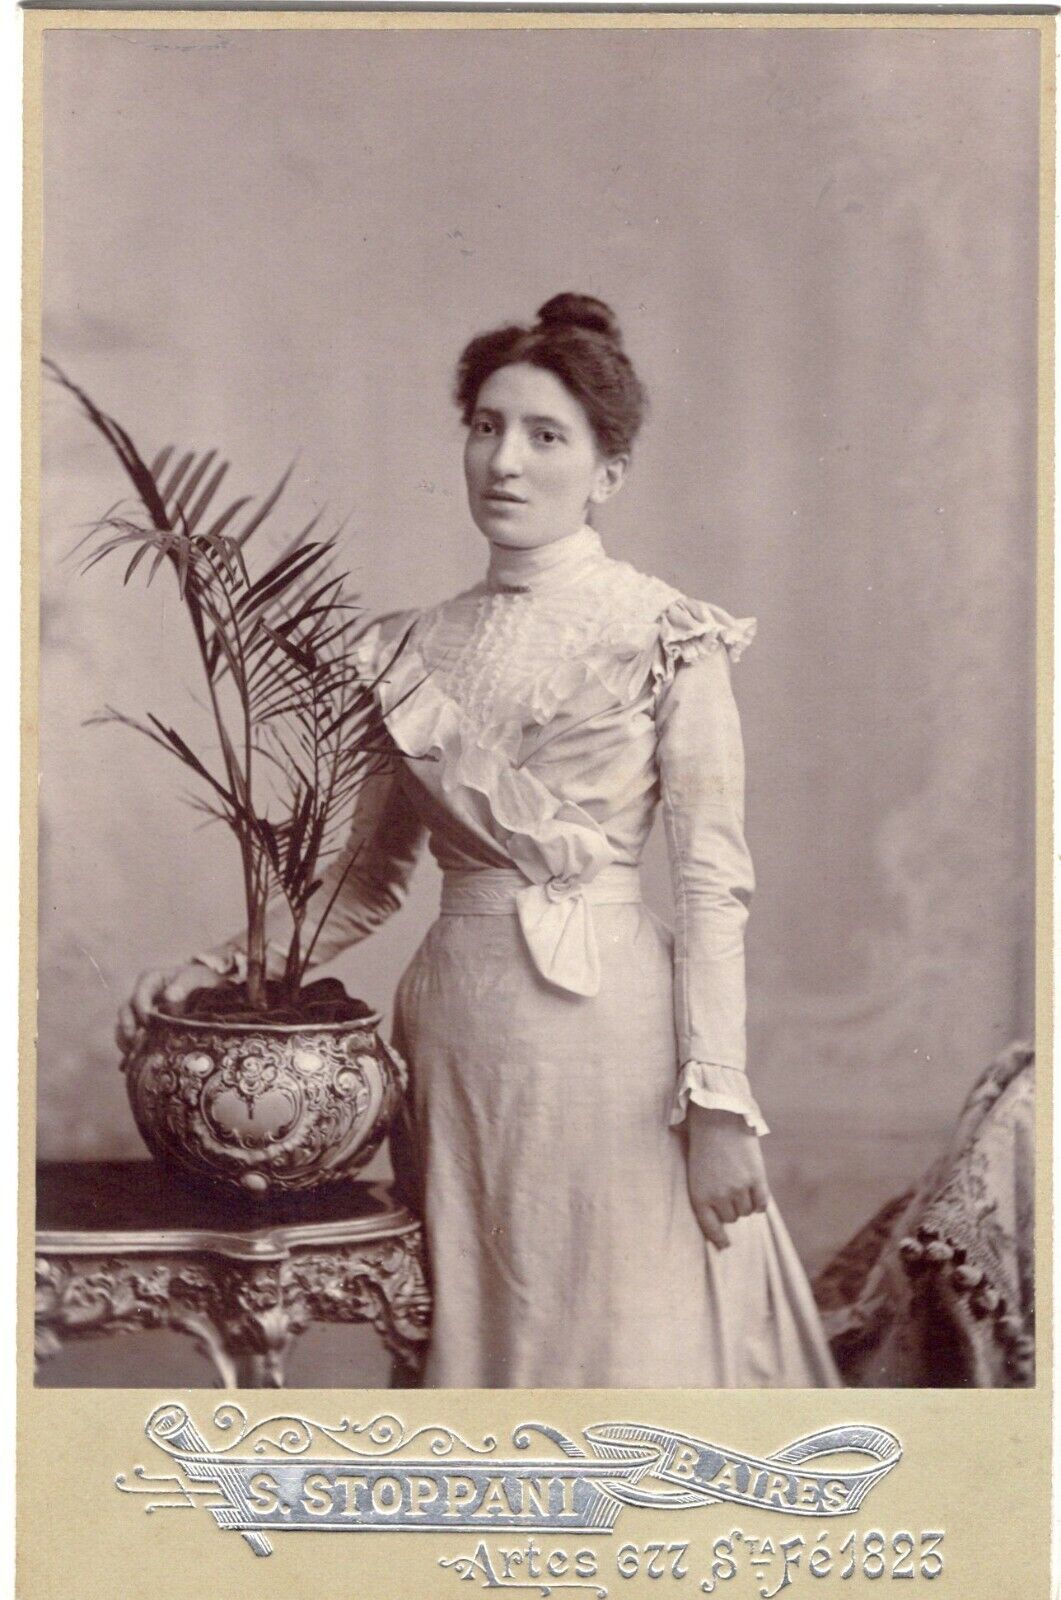 PRETTY YOUNG WOMAN IN BUENOS AIRES : FINE FASHION : CABINET CARD